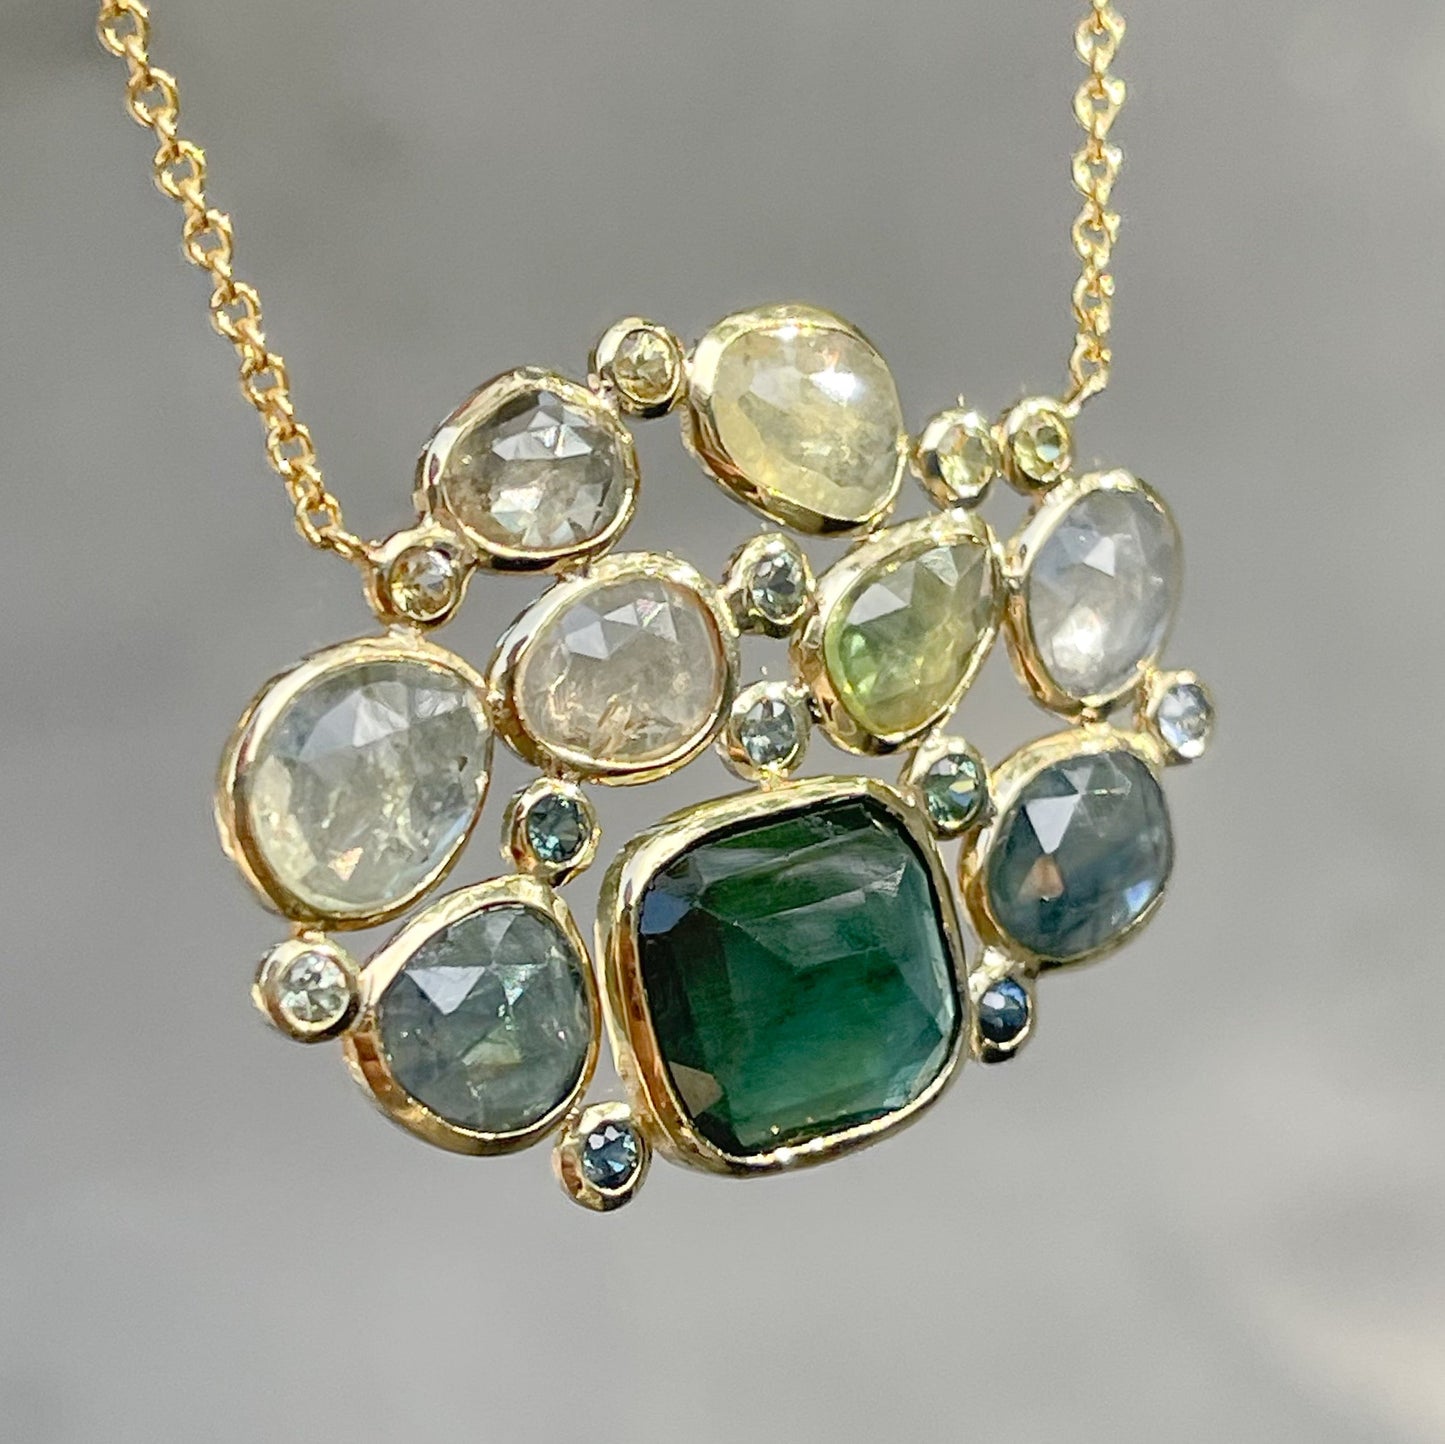 Angled shot of a Tourmaline and Sapphire Necklace by NIXIN Jewelry with muted green gemstones in bezel settings.